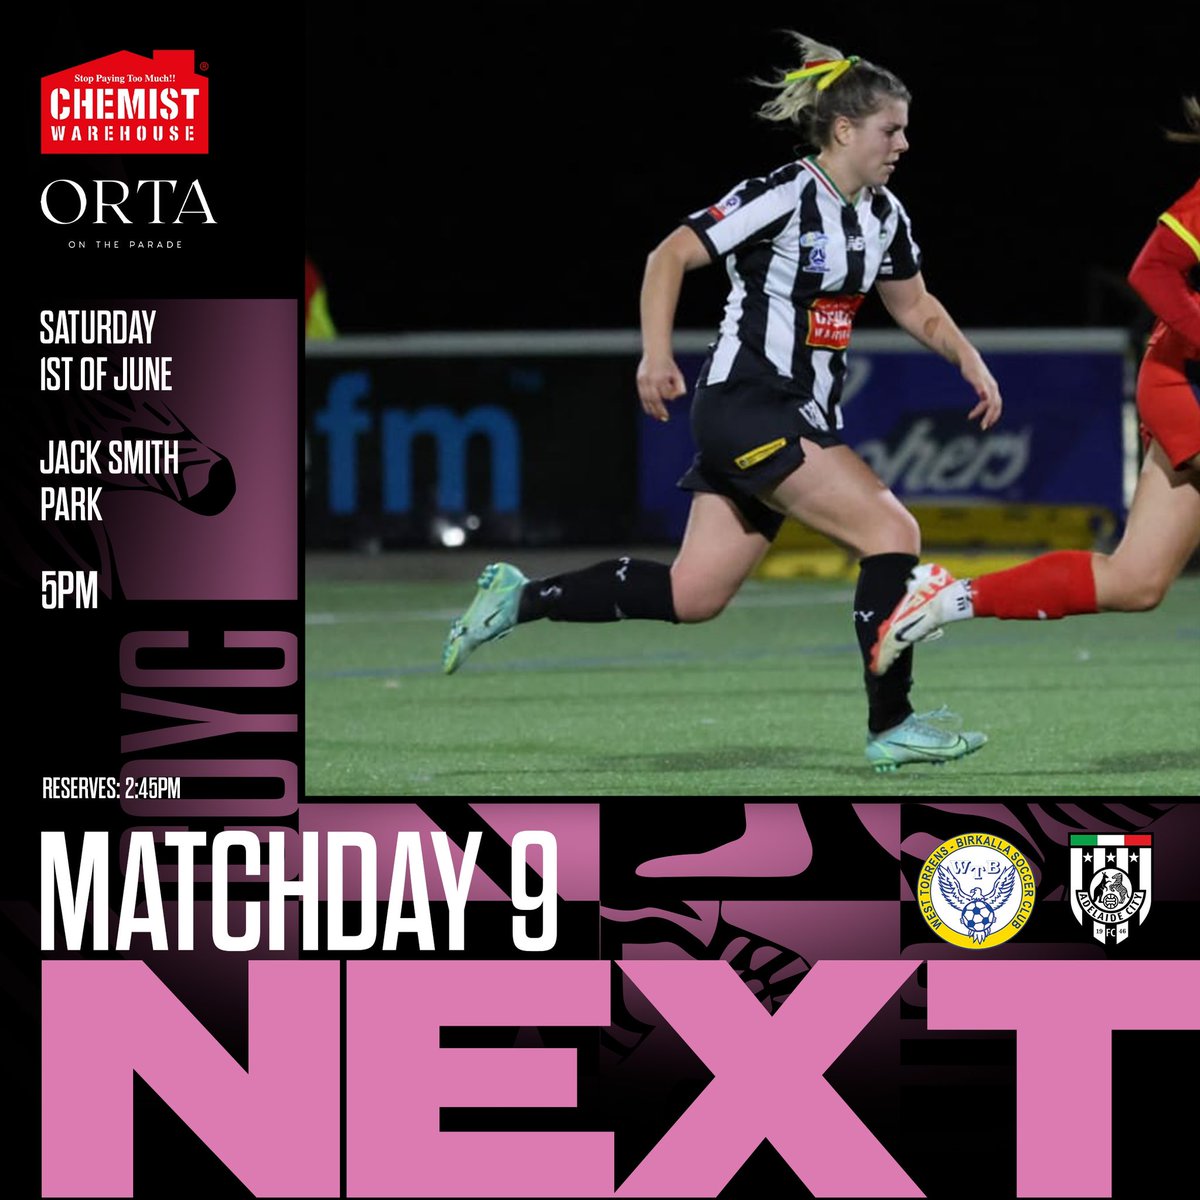 COMING UP:

🆚 West Torrens Birkalla 
⏰ Saturday @ 5pm
🏟️ Jack Smith Park

⚫️⚪️

#ThisIsOurCity